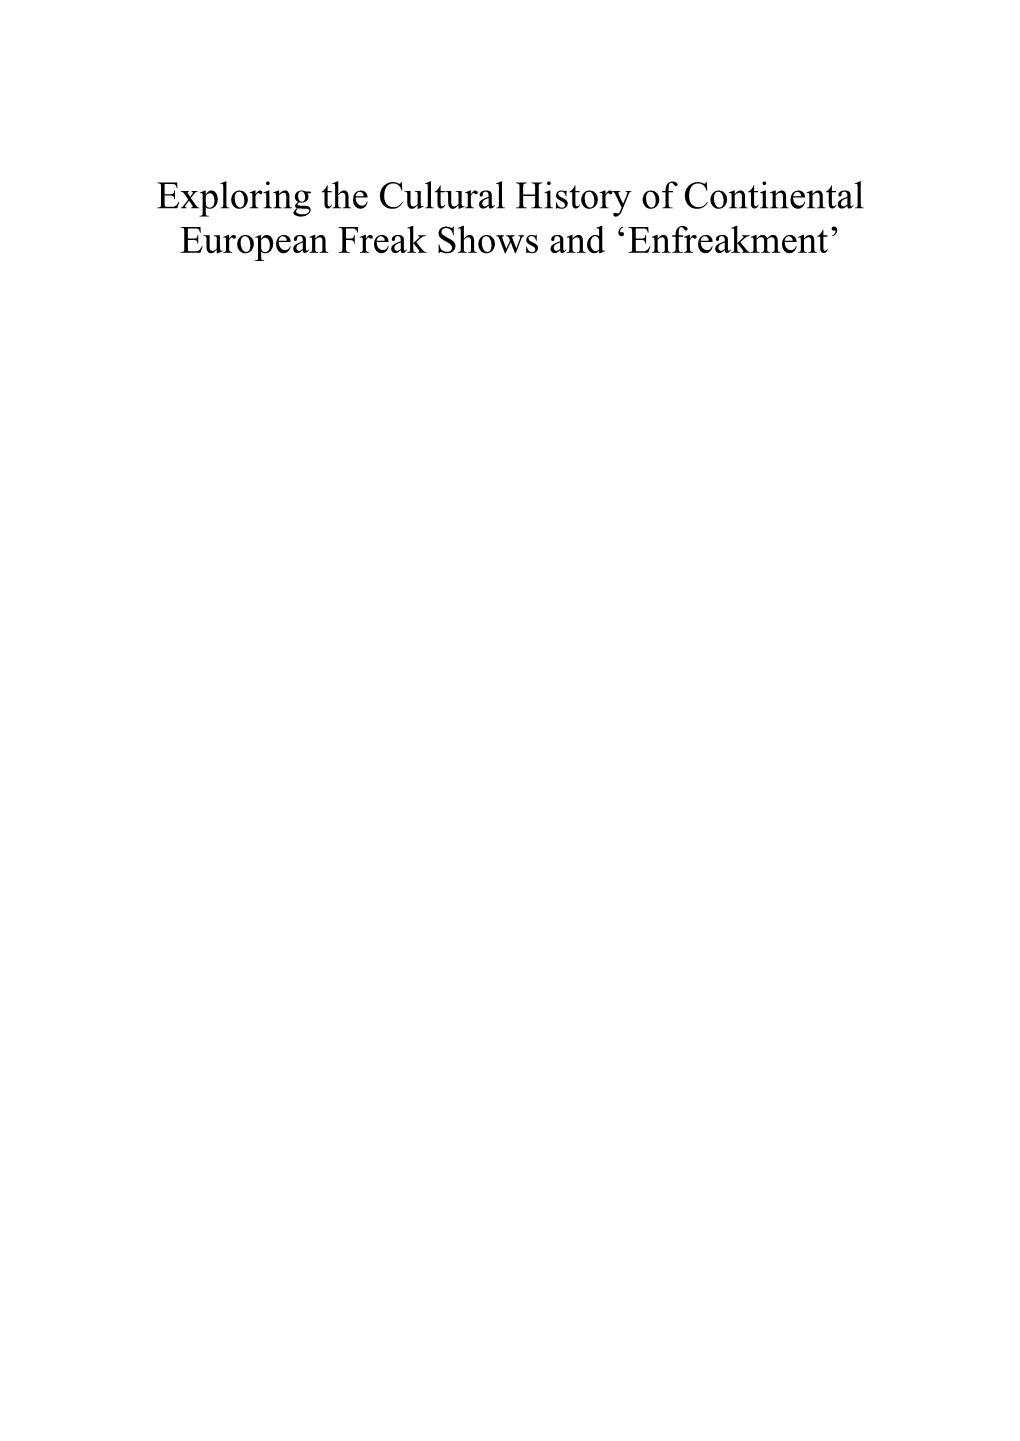 Exploring the Cultural History of Continental European Freak Shows and ‘Enfreakment’